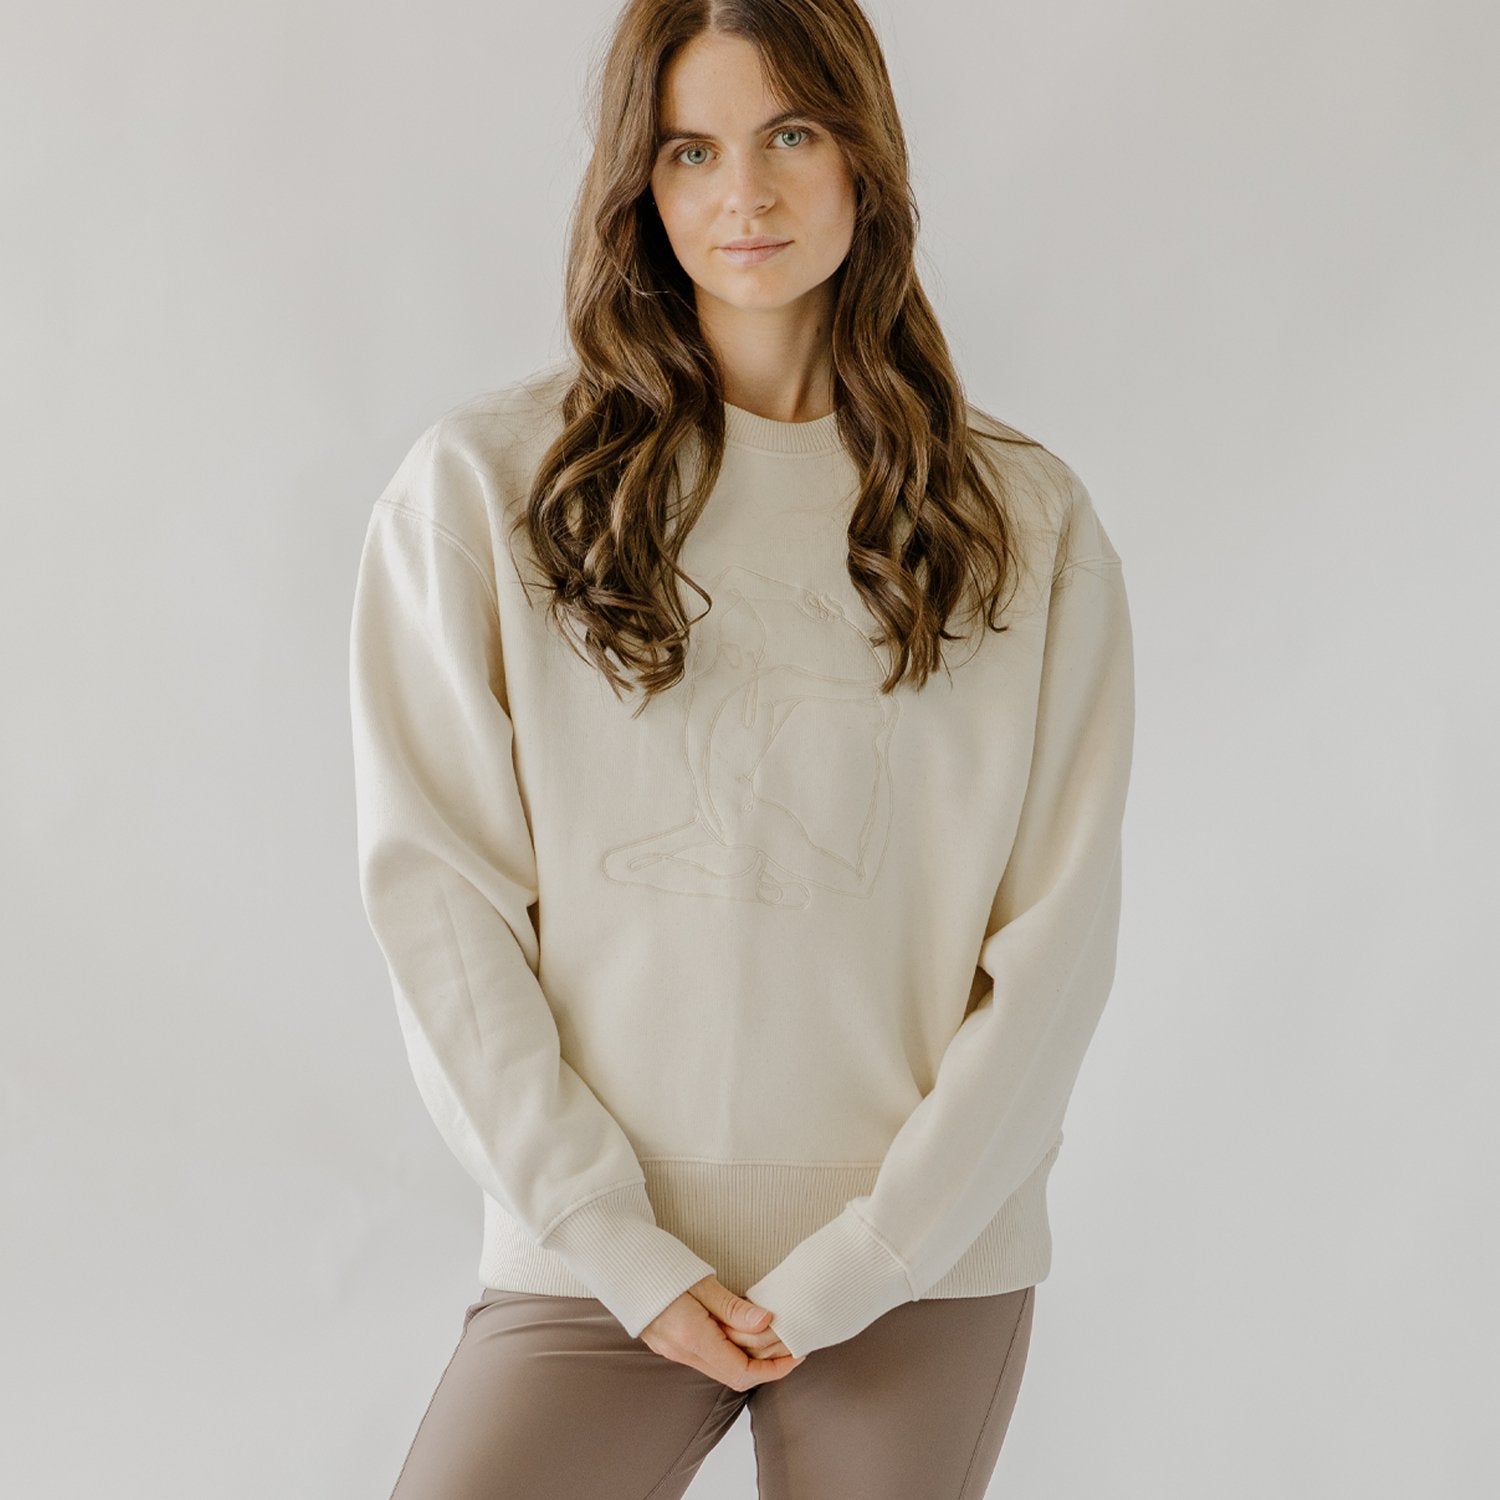 Tonal "Mermaid" Yoga Pose Embroidered Ecru Sweater - Actively Conscious